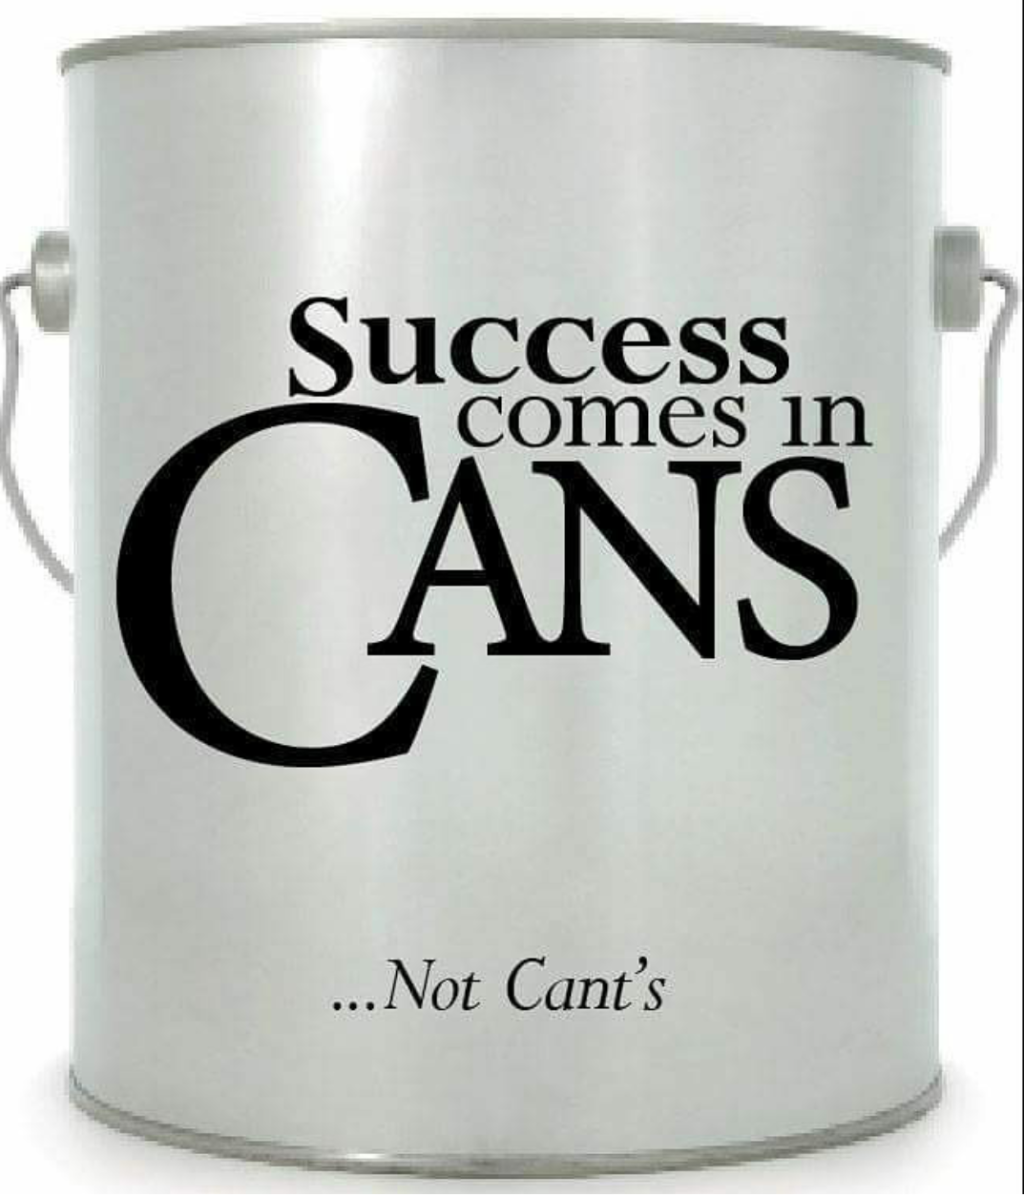 ELEVEN CANS FOR SUCCESS